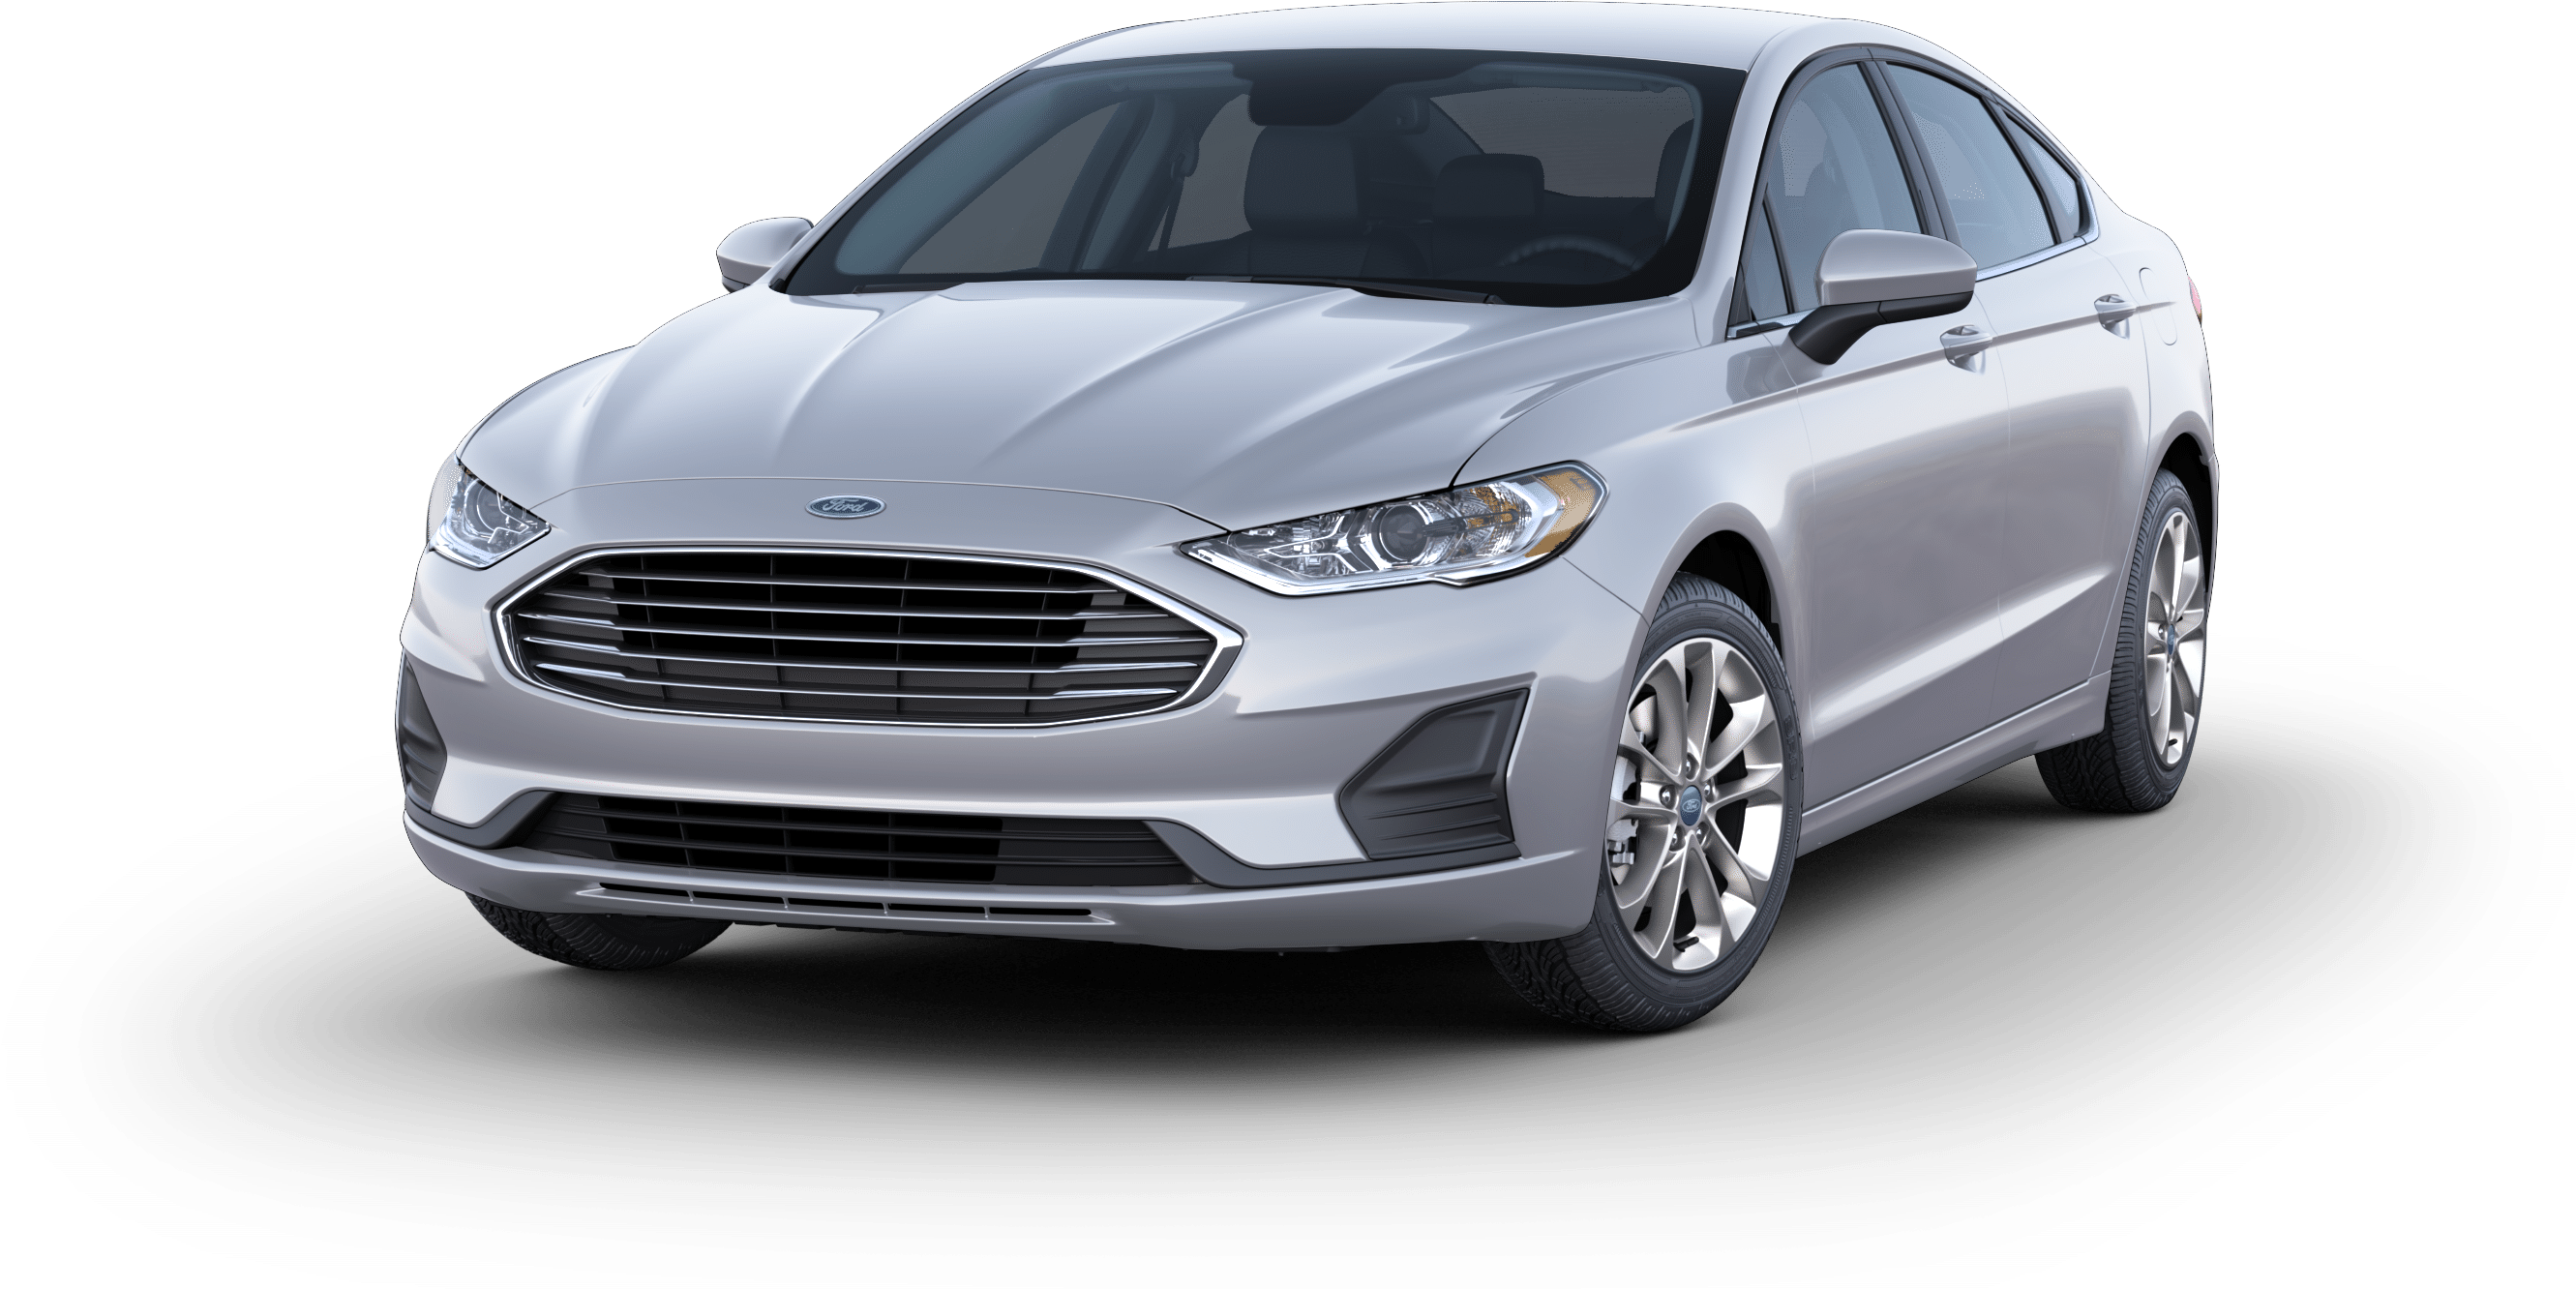 2020 Ford Fusion Vehicle Photo In Jena, La 71342-4406 - Ford, Hd Png Download